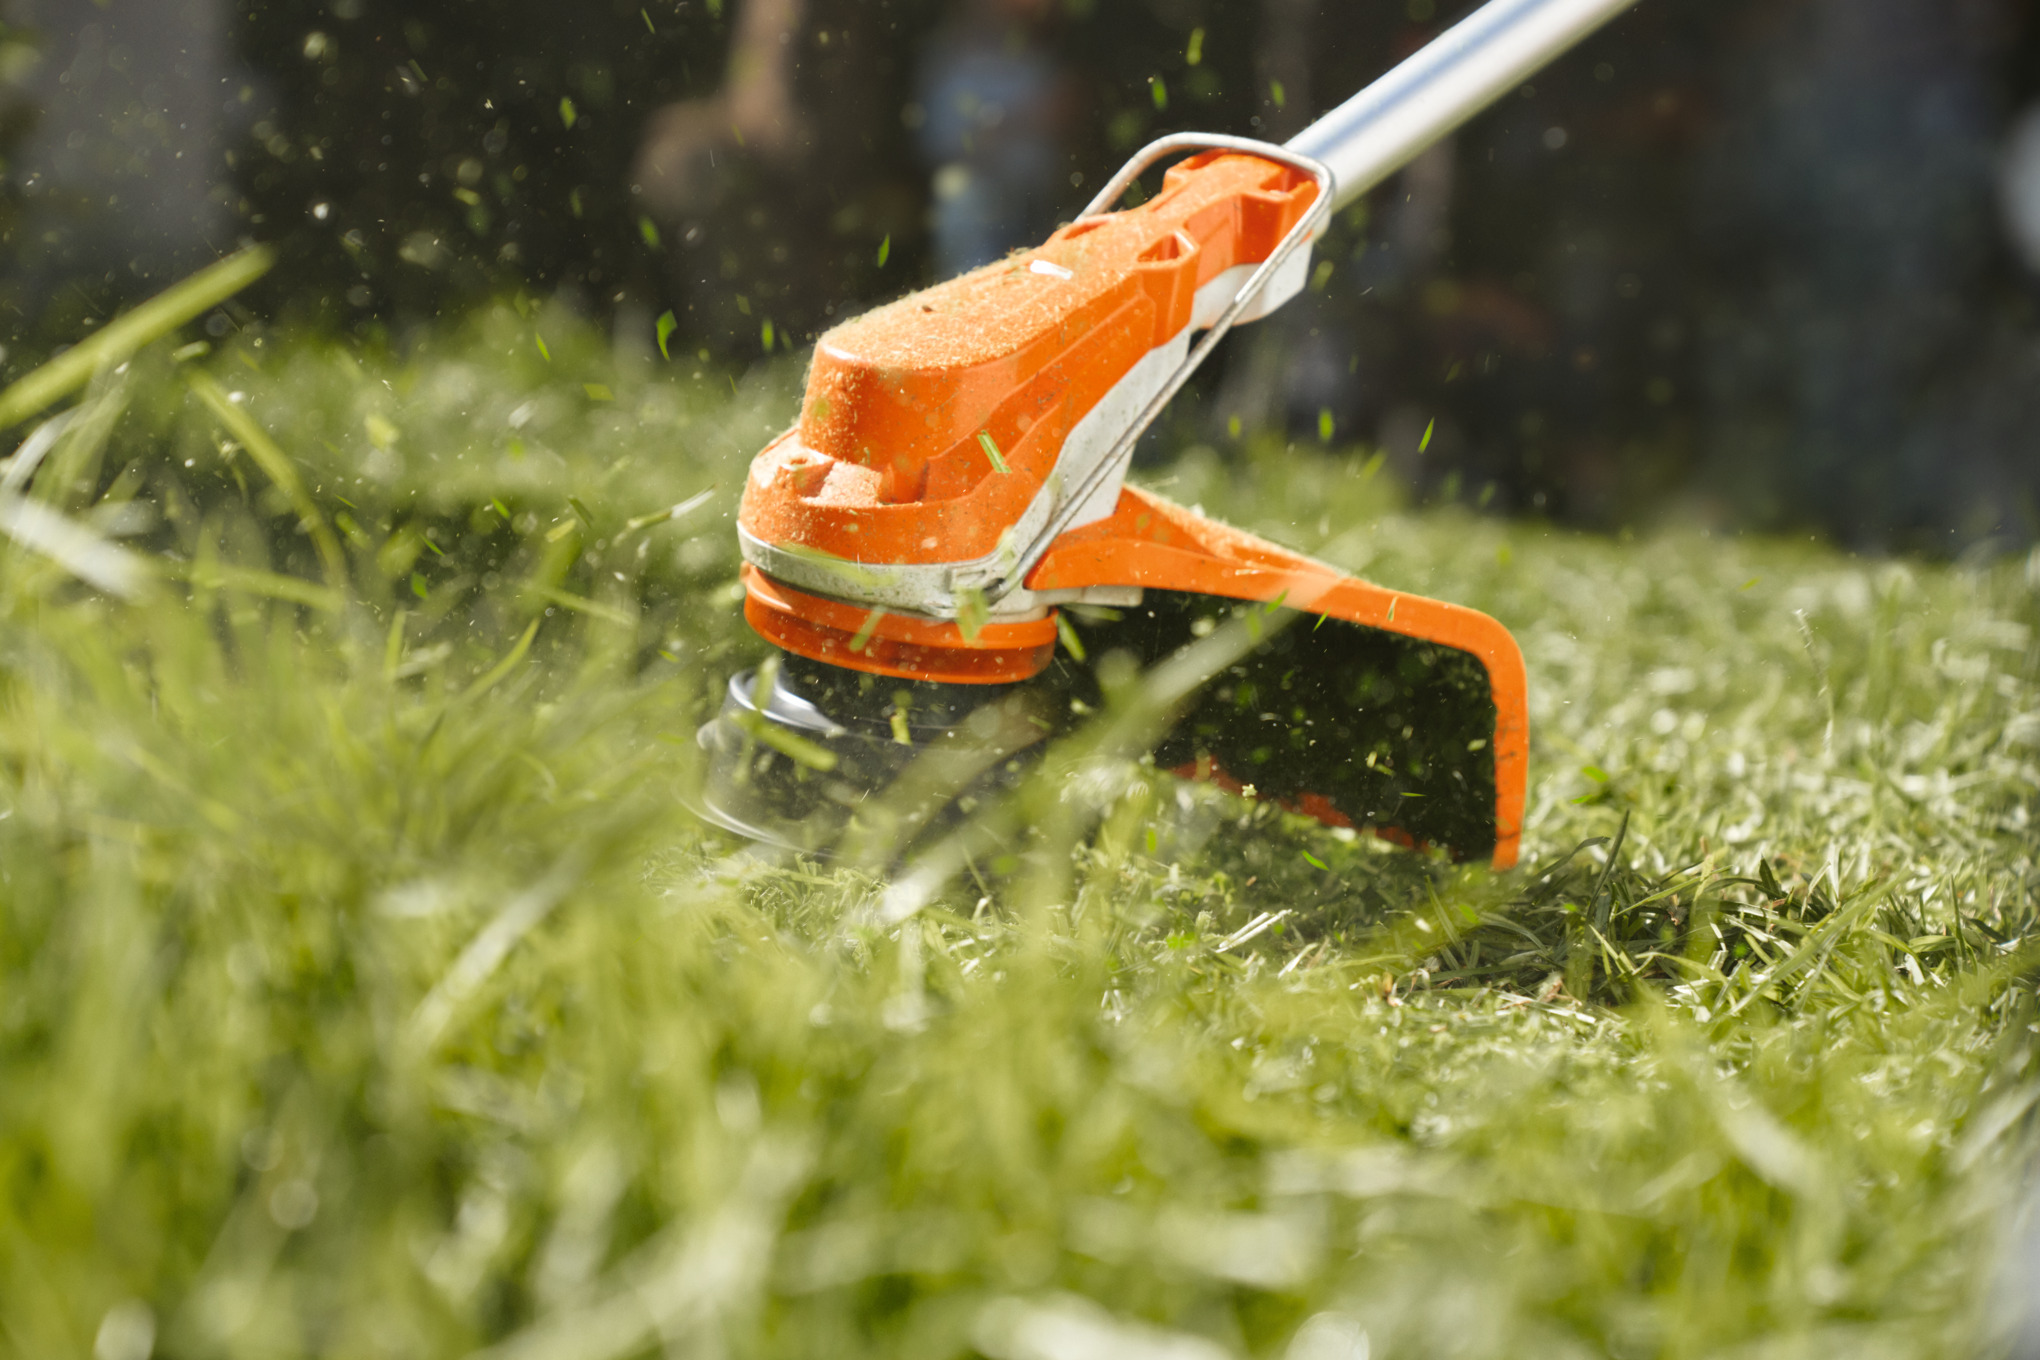 https://www.stihl.de/content/dam/stihl/media/product-categories/tools/grass-trimmers--brushcutters-and-clearing-saws/cordless--grass-trimmers--brushcutters-and-clearing-saws/50567.jpg